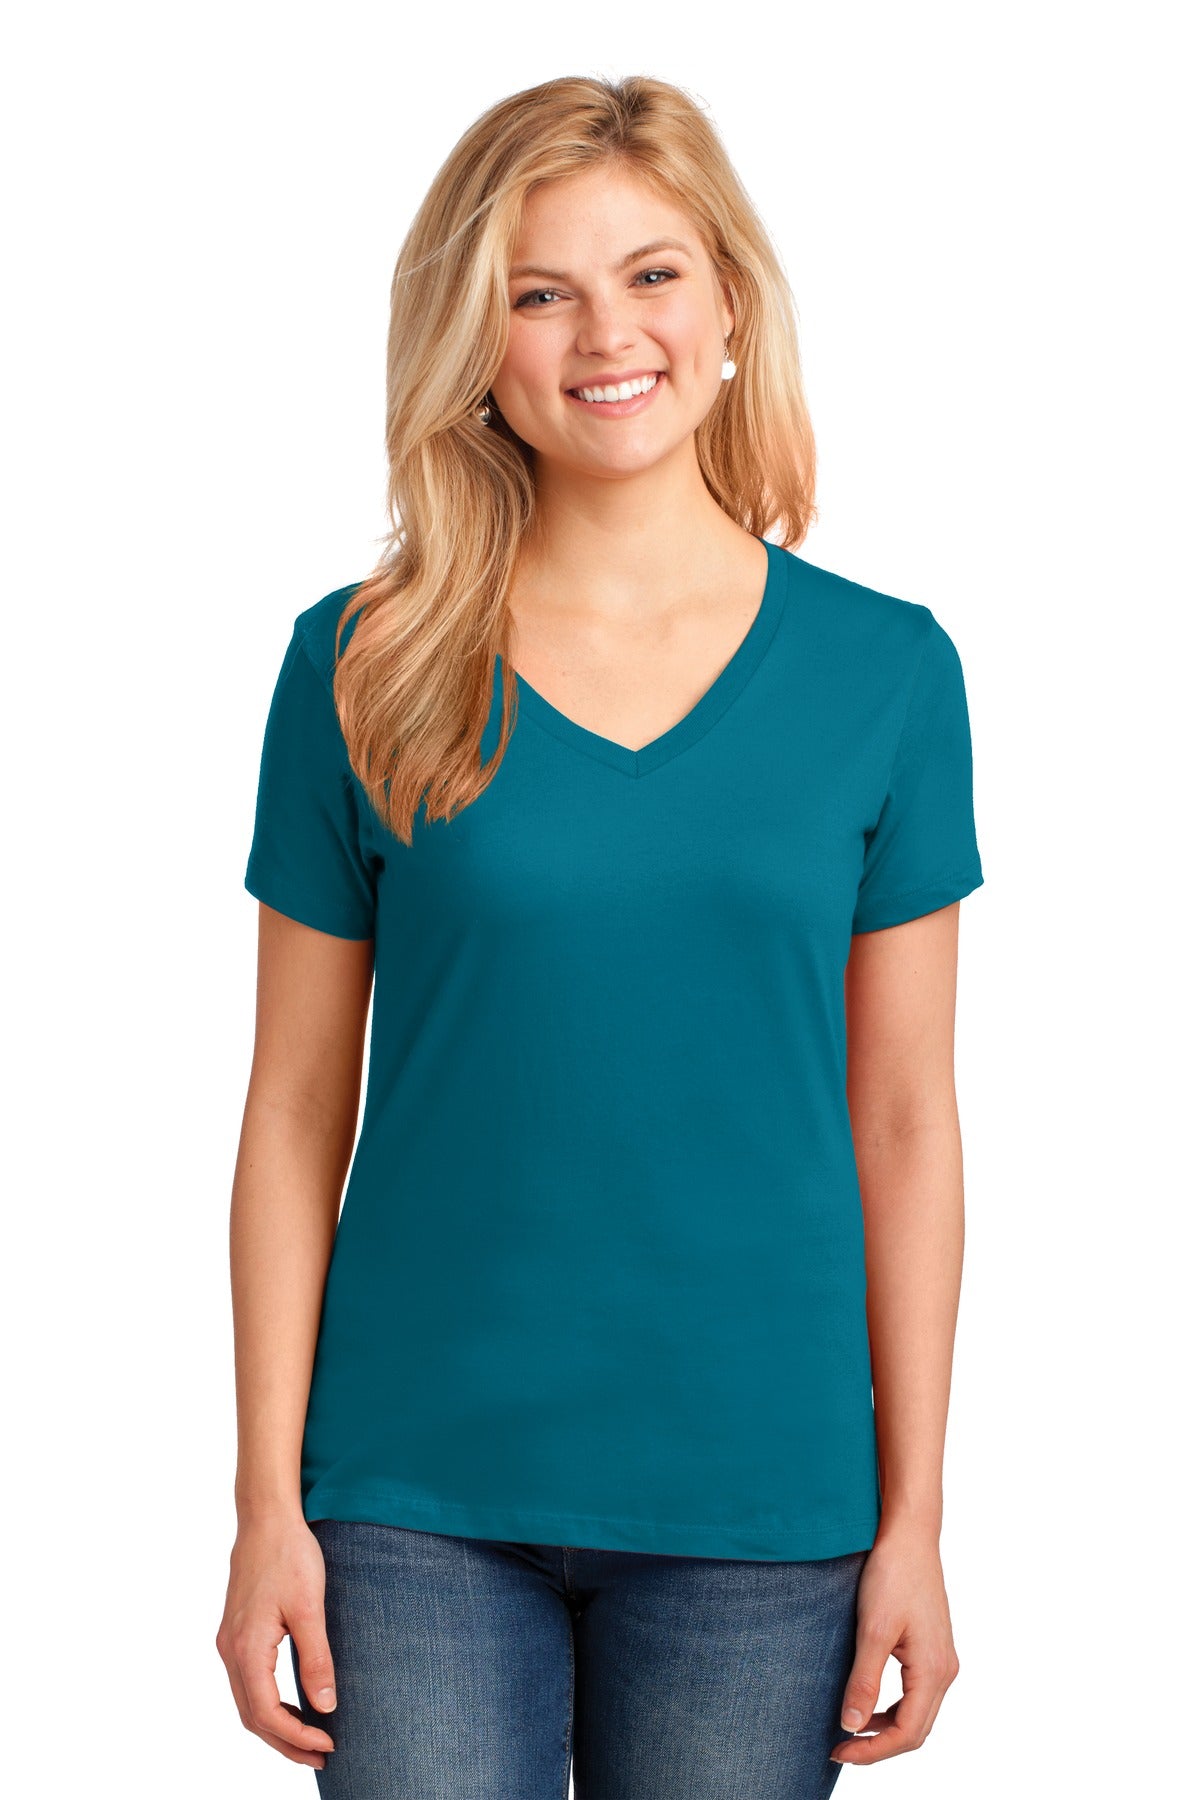 Photo of Port & Company Ladies LPC54V  color  Teal